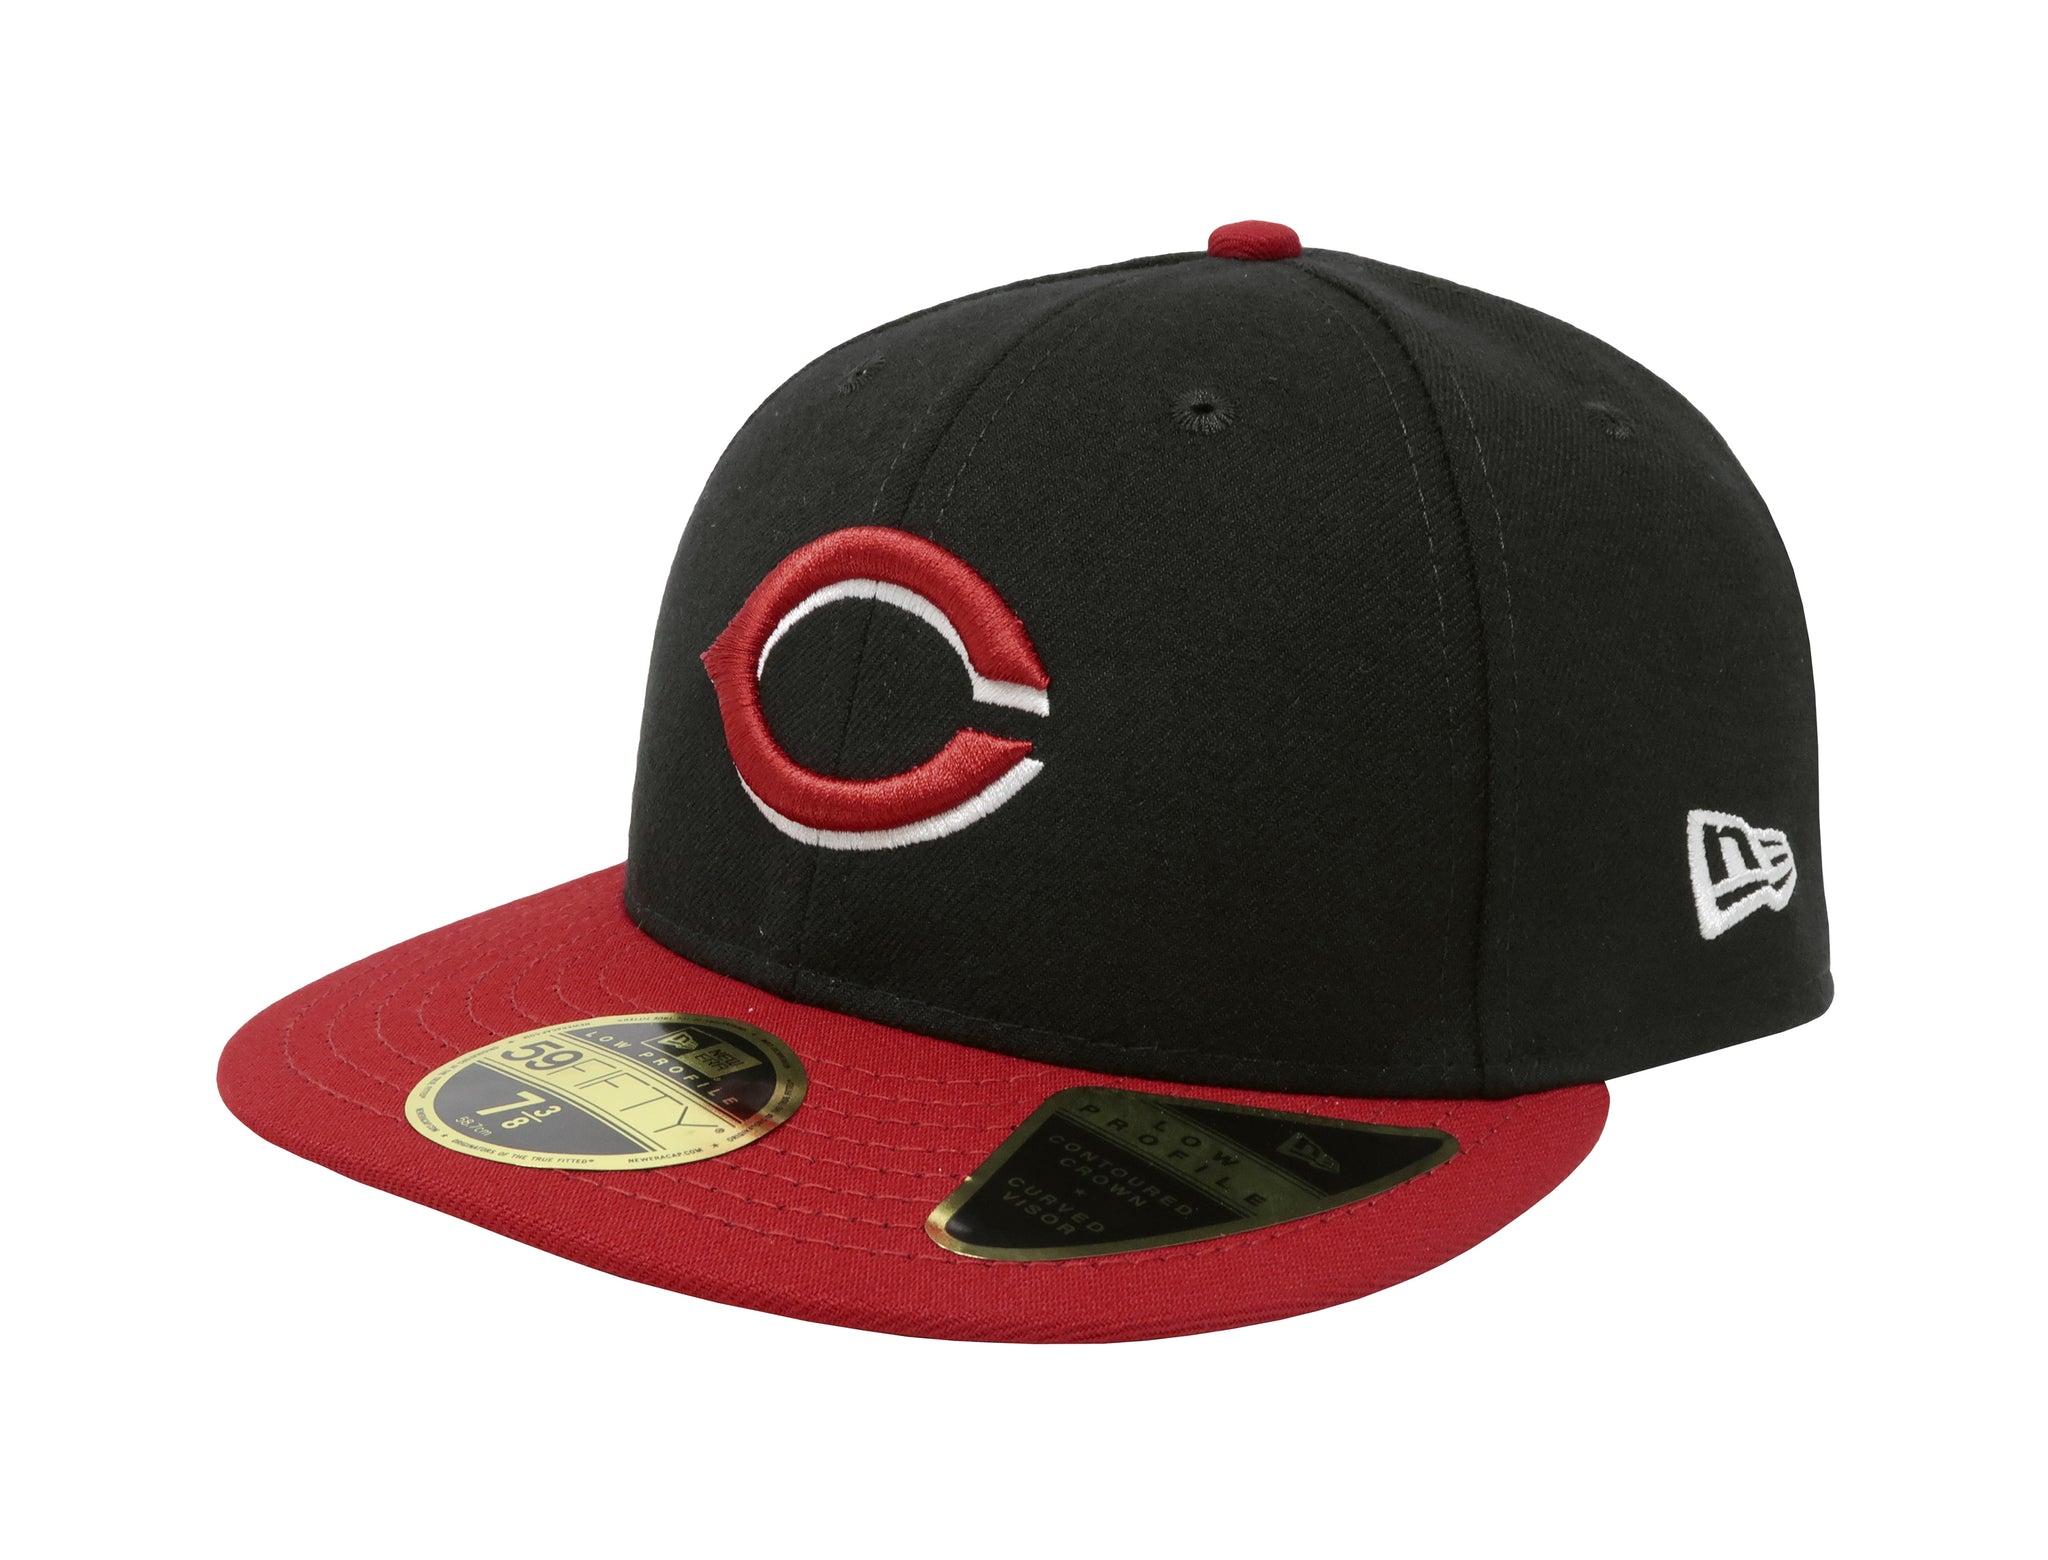 Whats The Difference Between a 59FIFTY and a 59FIFTY Low Profile?